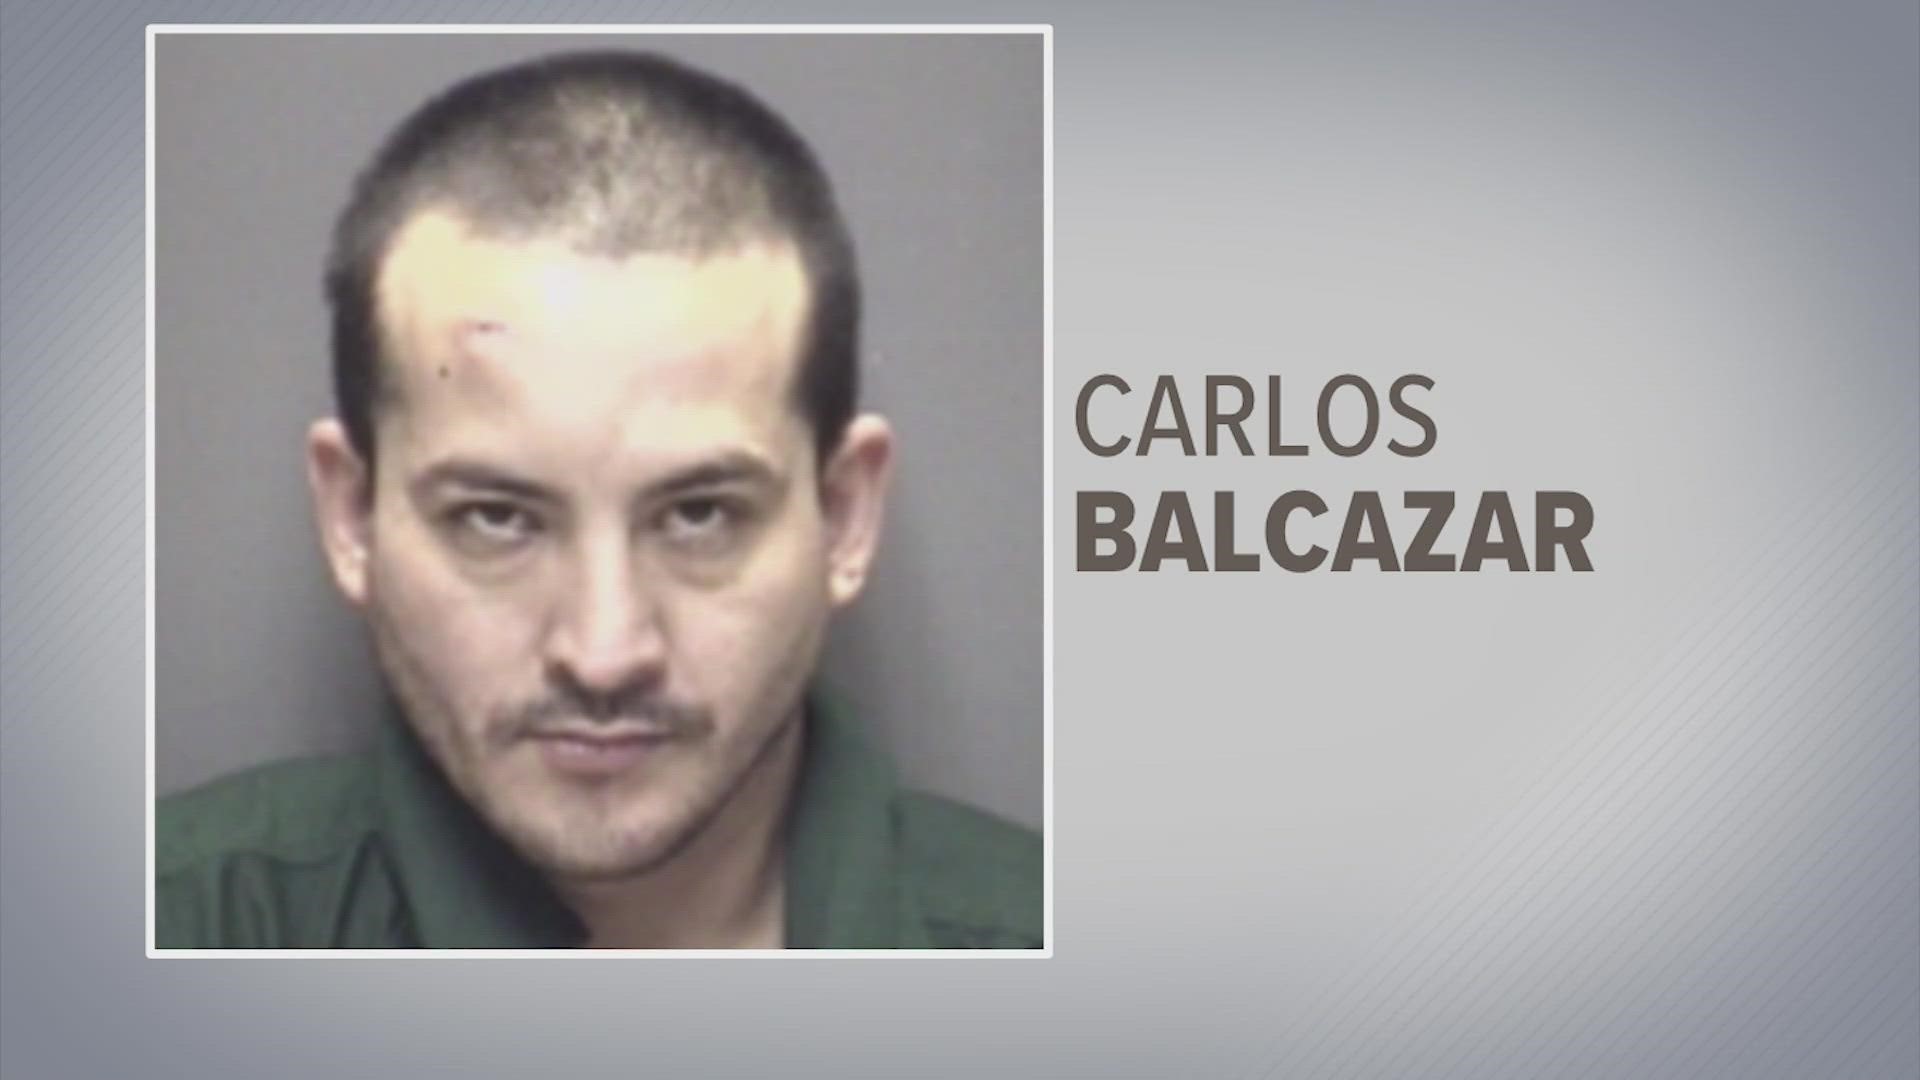 Carlos Lara-Balcazar was initially arrested for tampering with evidence in connection to this case. He is now officially charged with murder, police said.